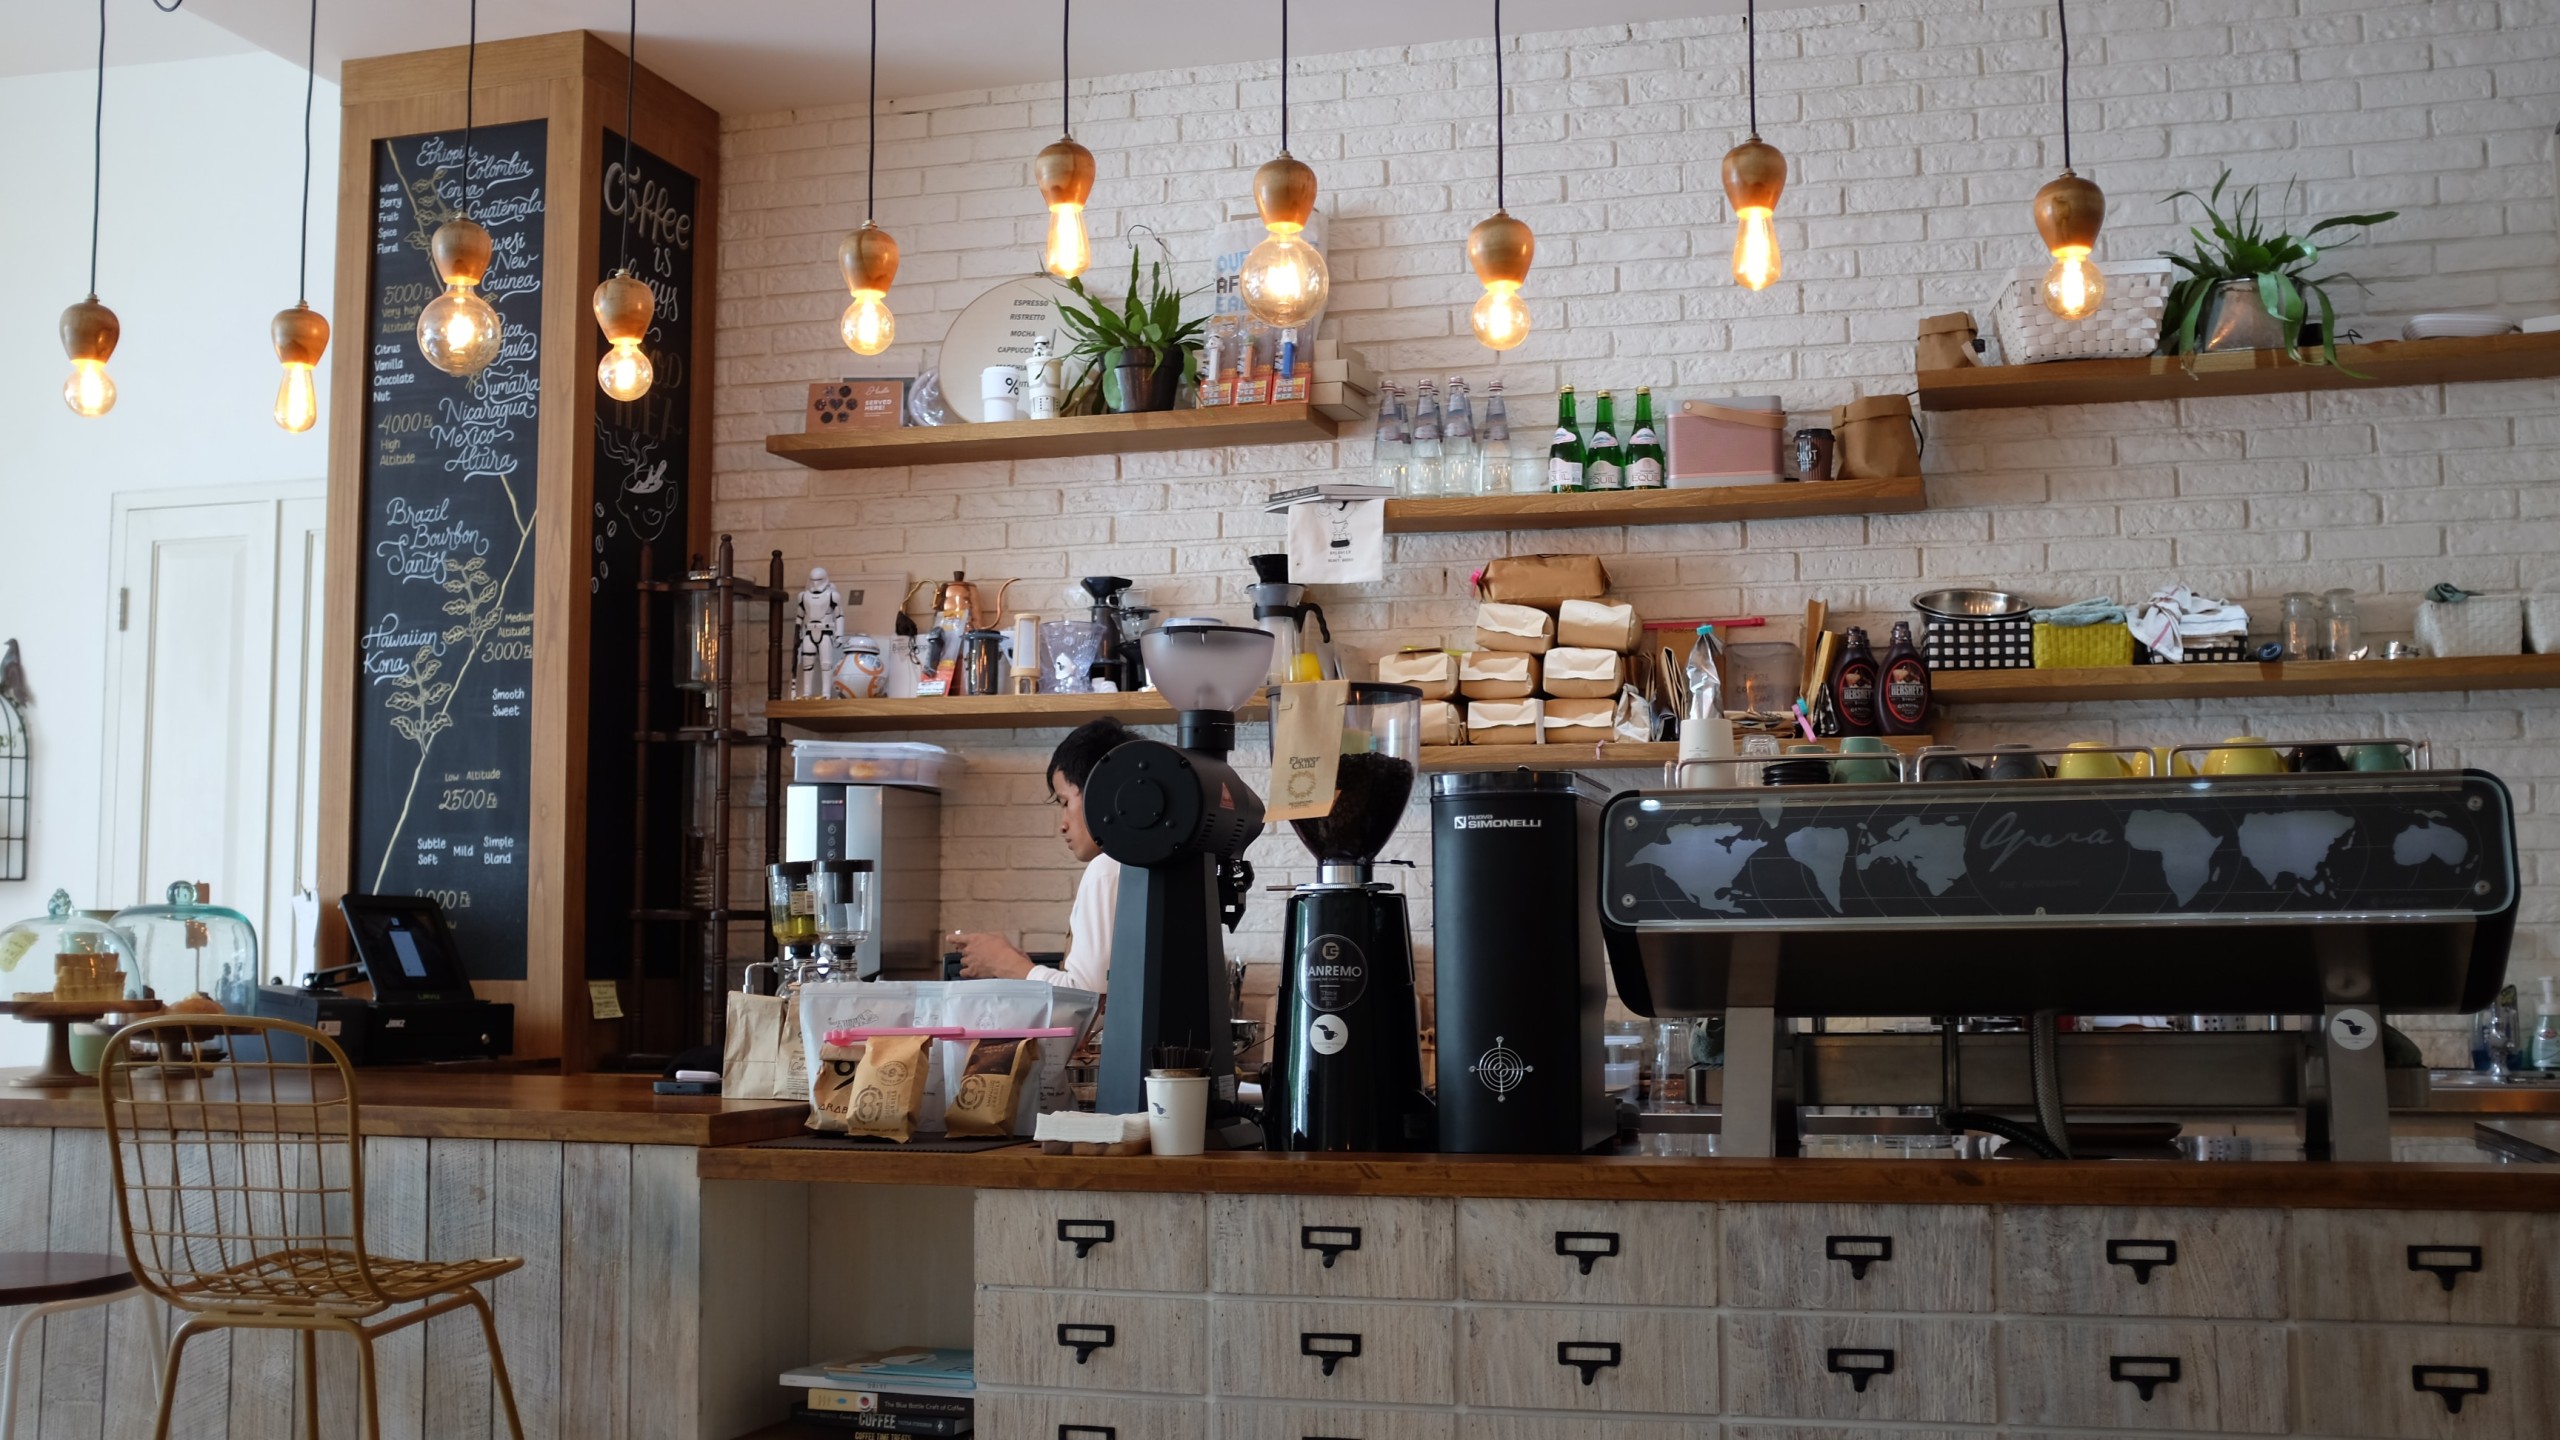 The Role of Digital Marketing Strategy for Coffee Shop